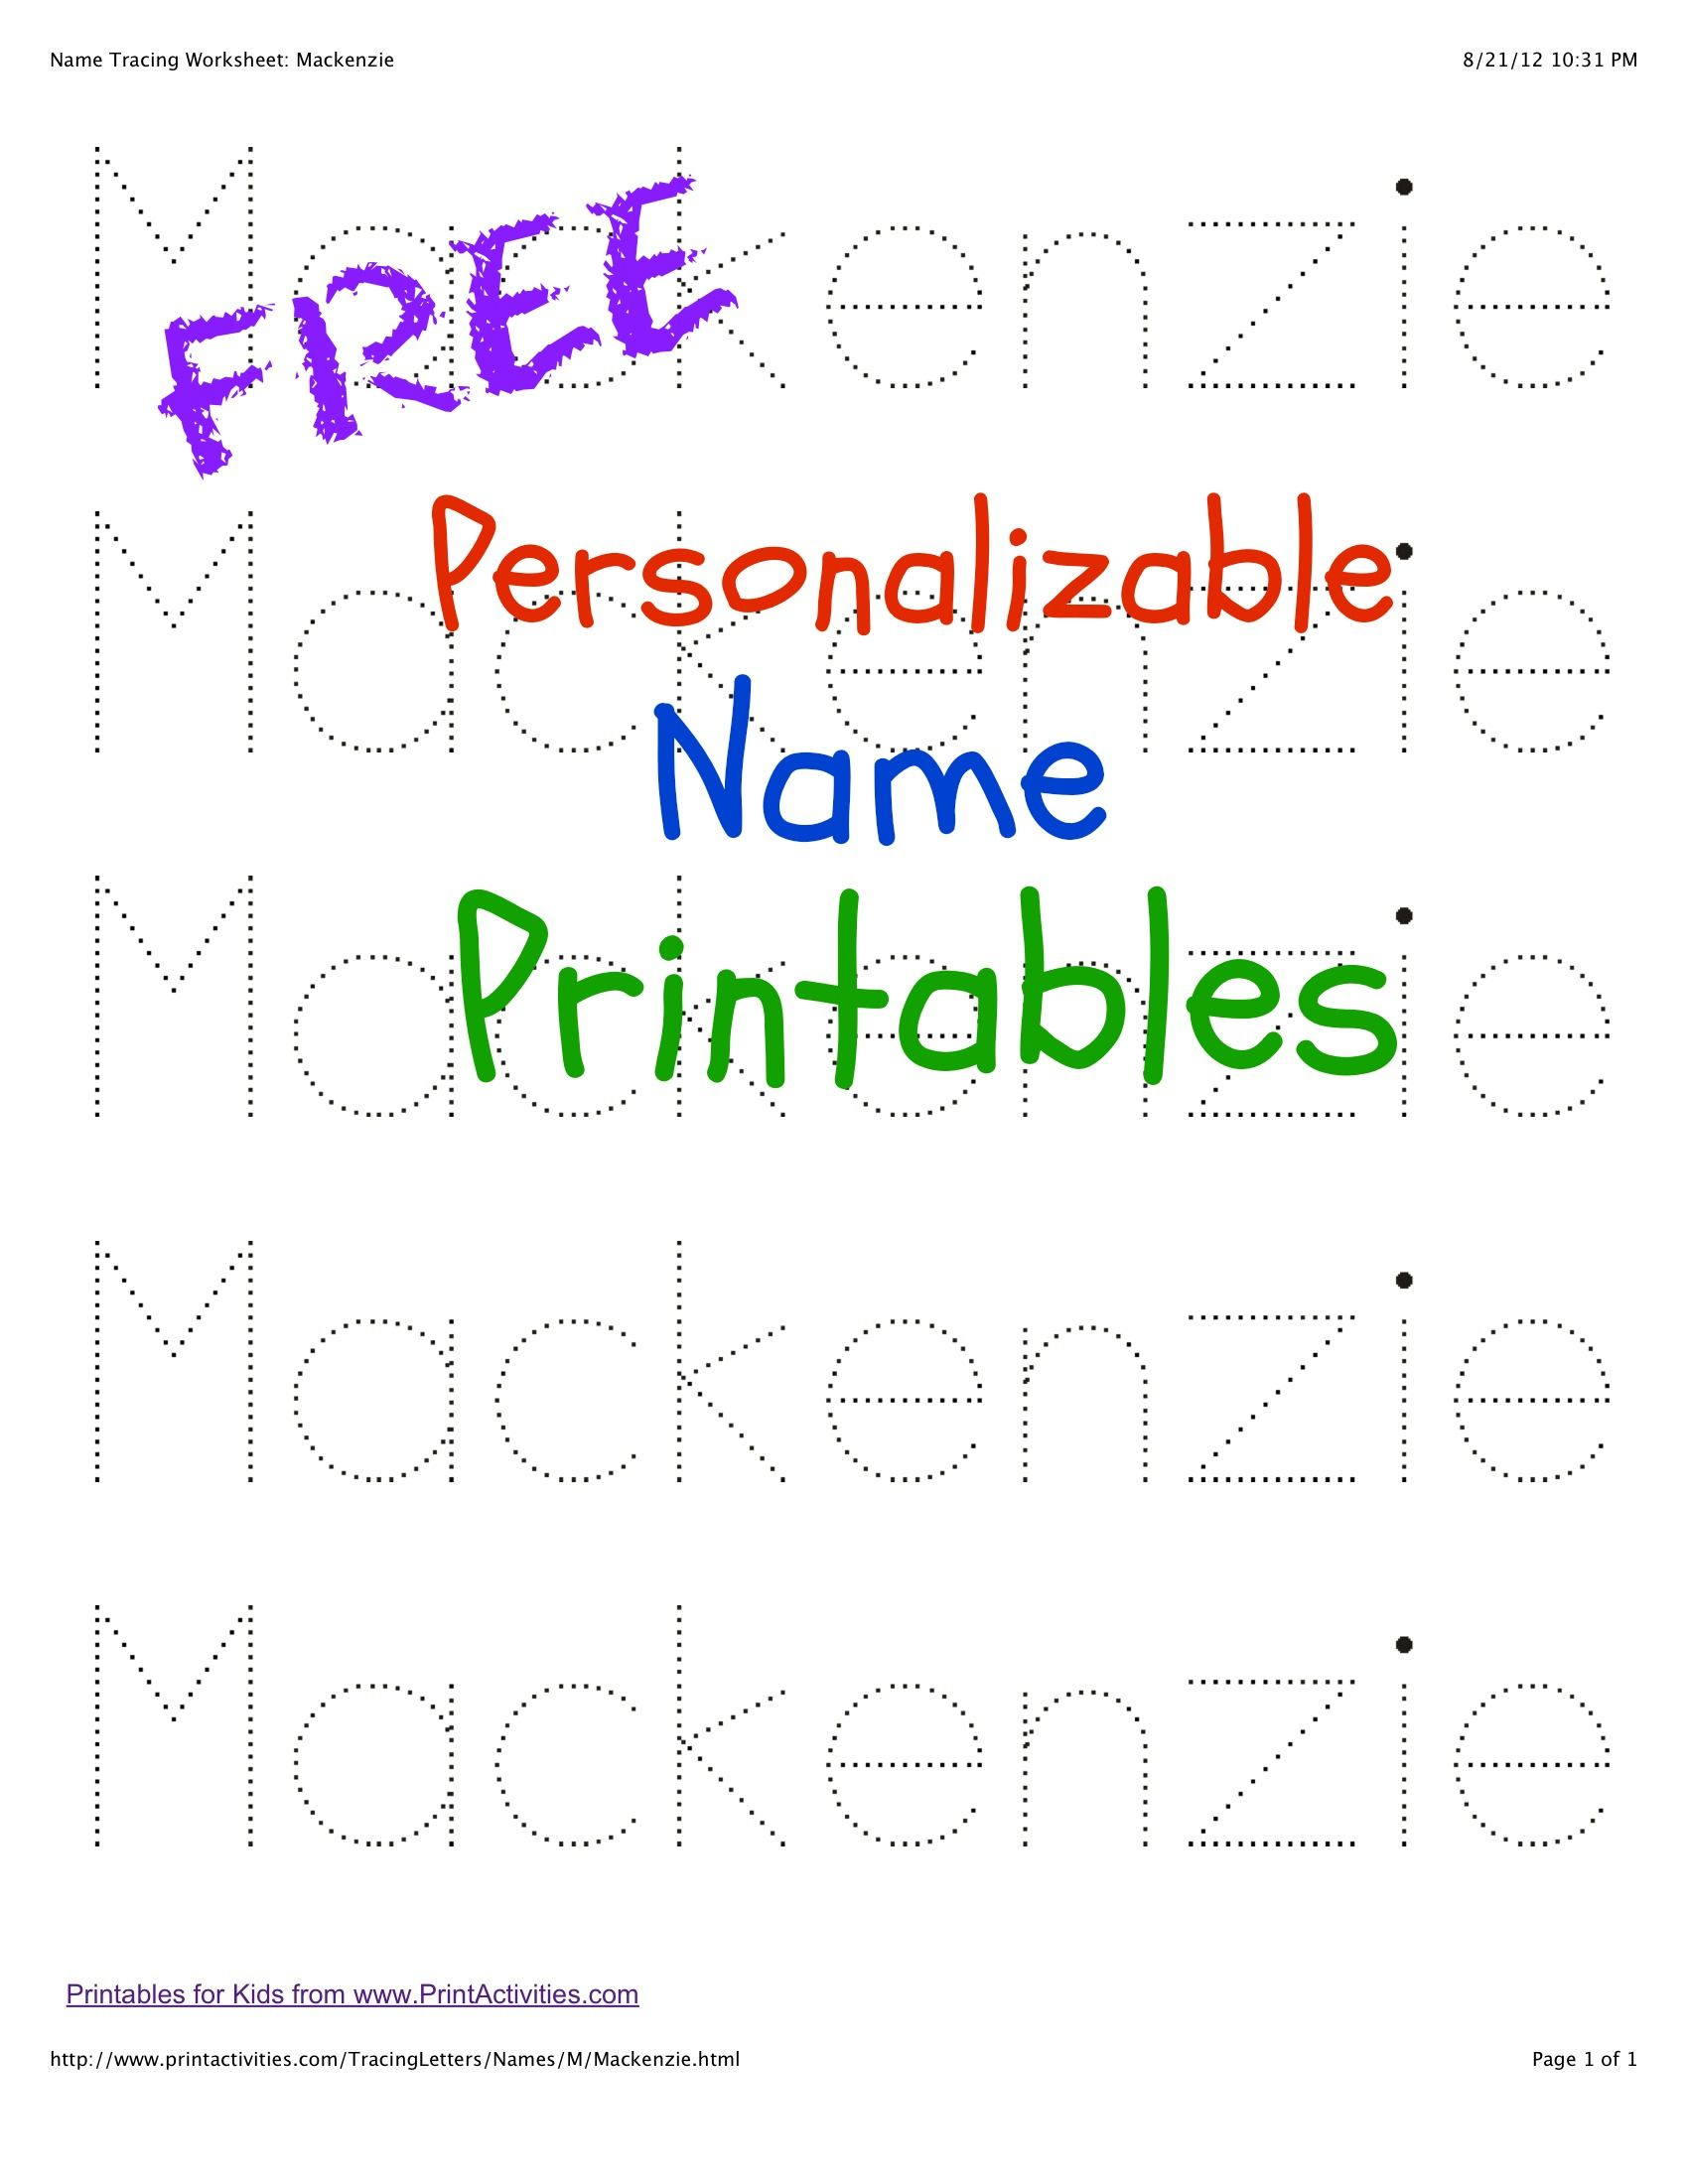 Pintheresa Mcduffie On Educational For Kids | Pinterest - Free Printable Name Tracing Worksheets For Preschoolers